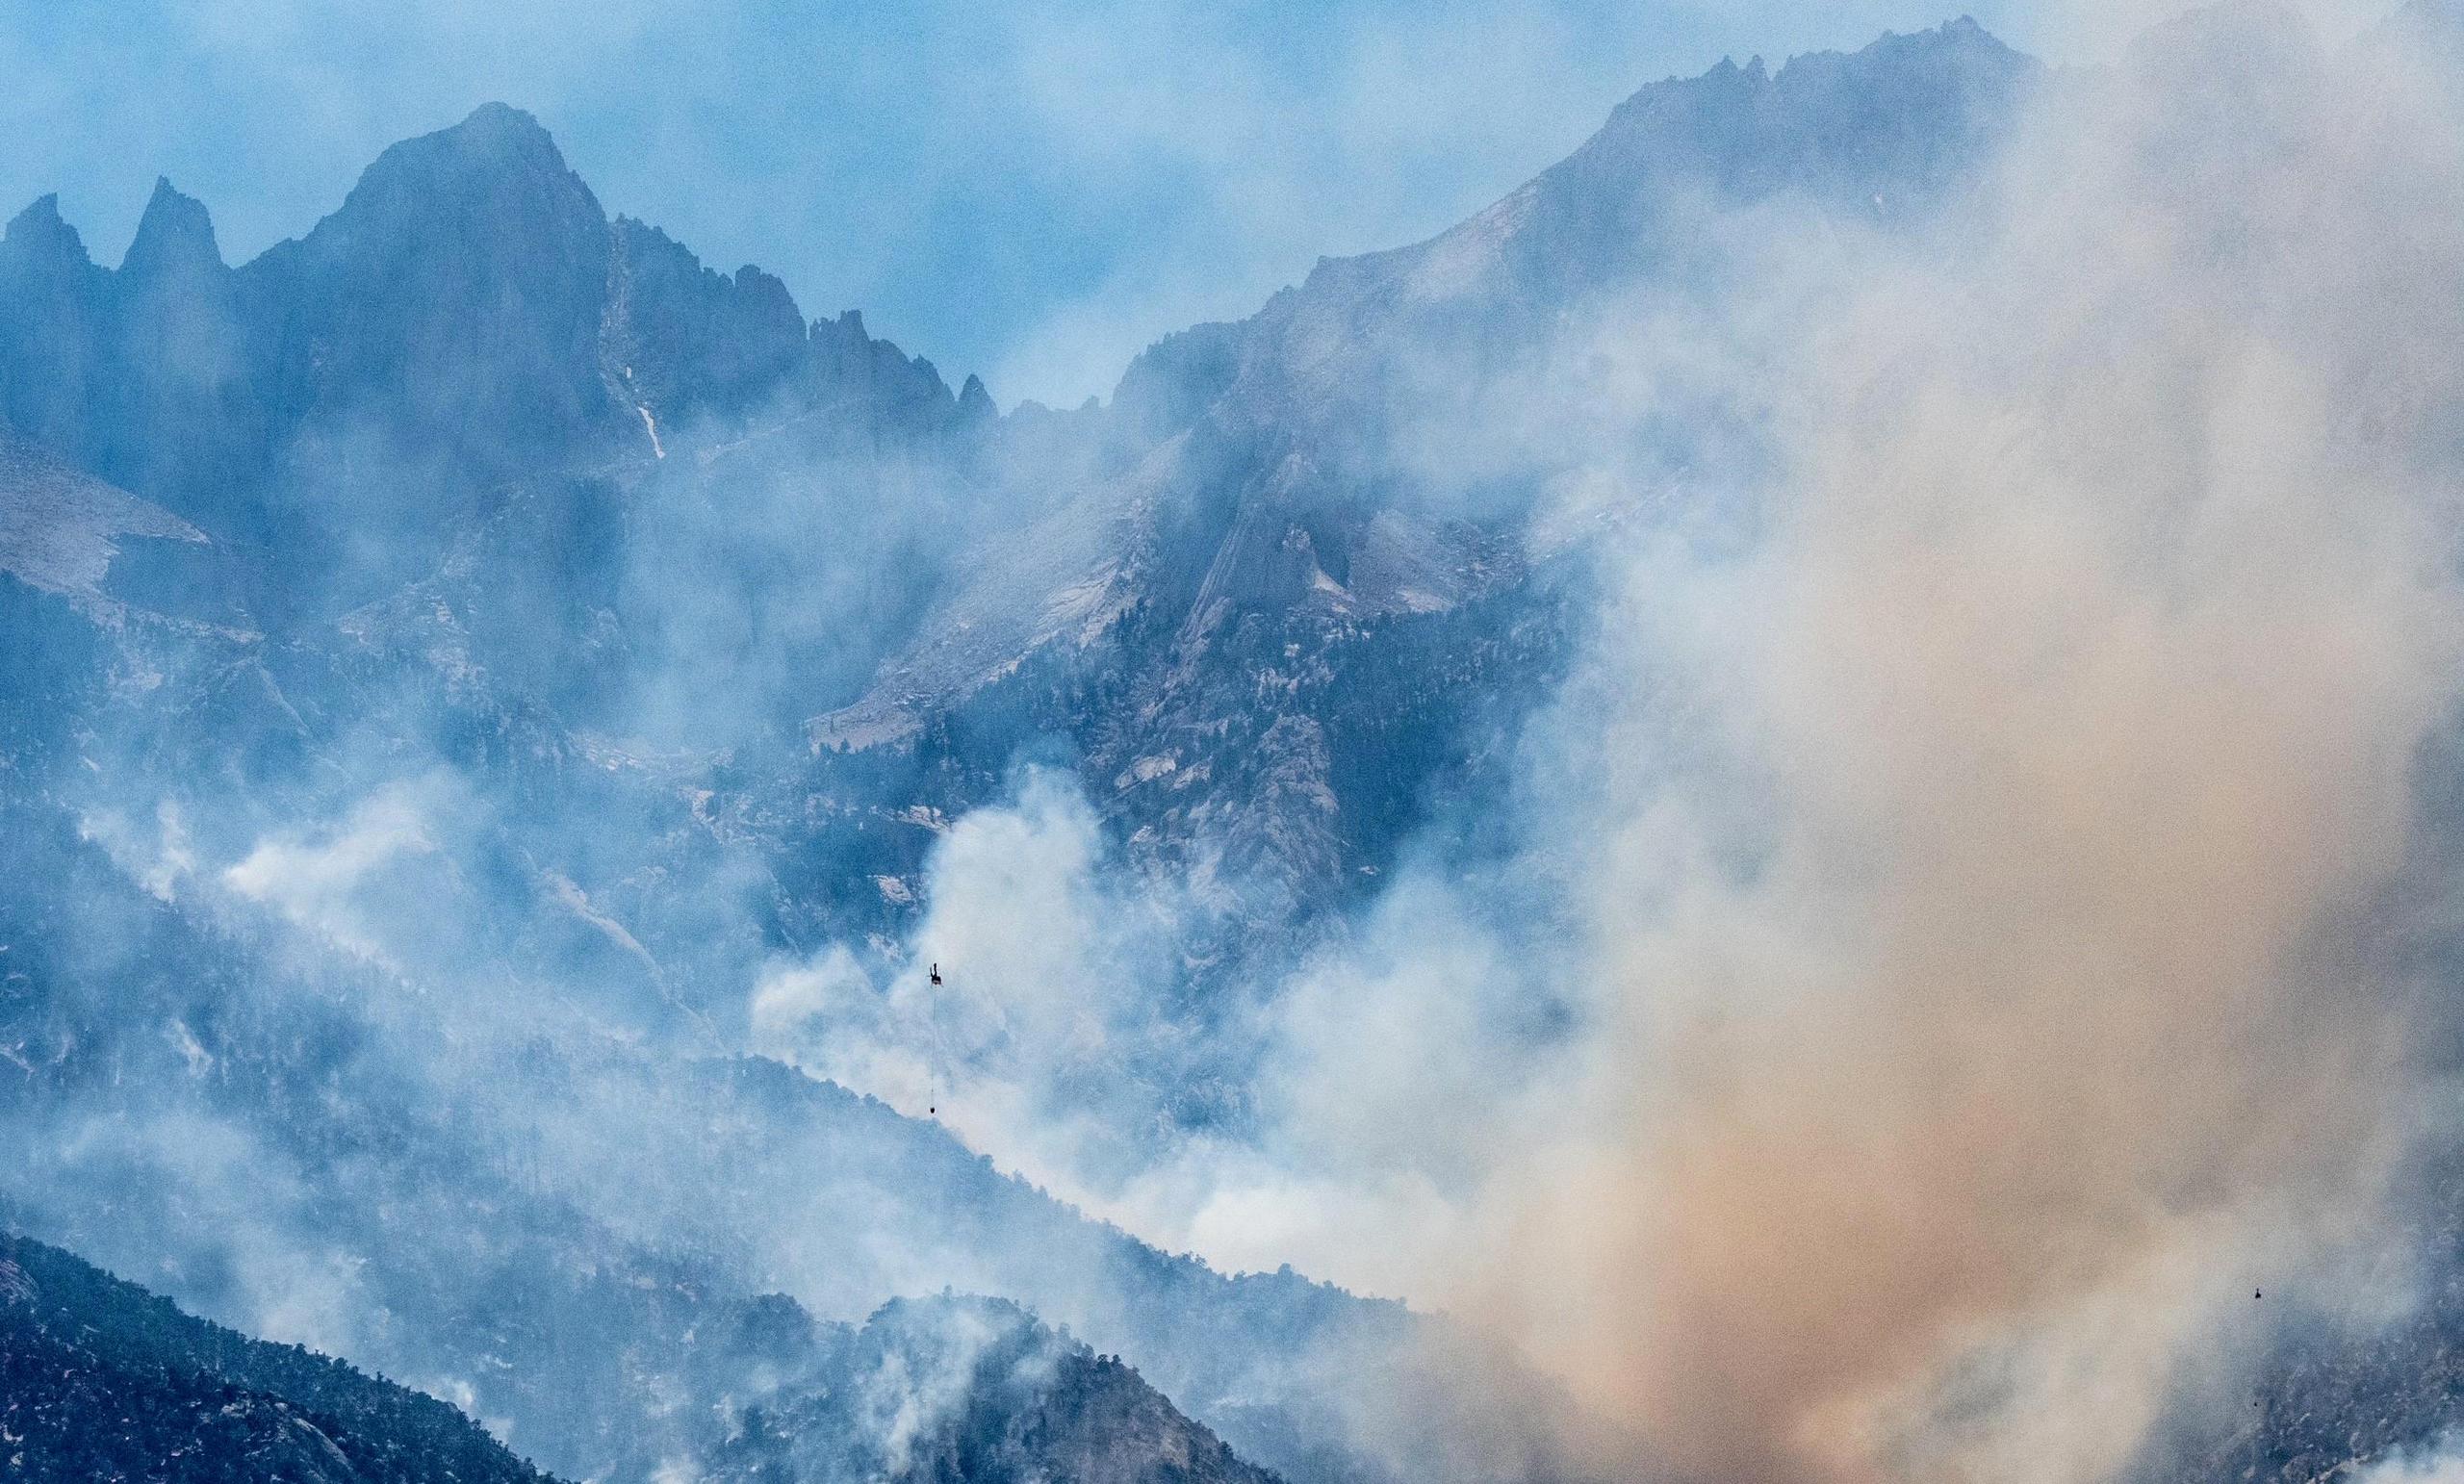 Smoking rising from canyons during Inyo Creek Fire with small helicopter seen in the distance